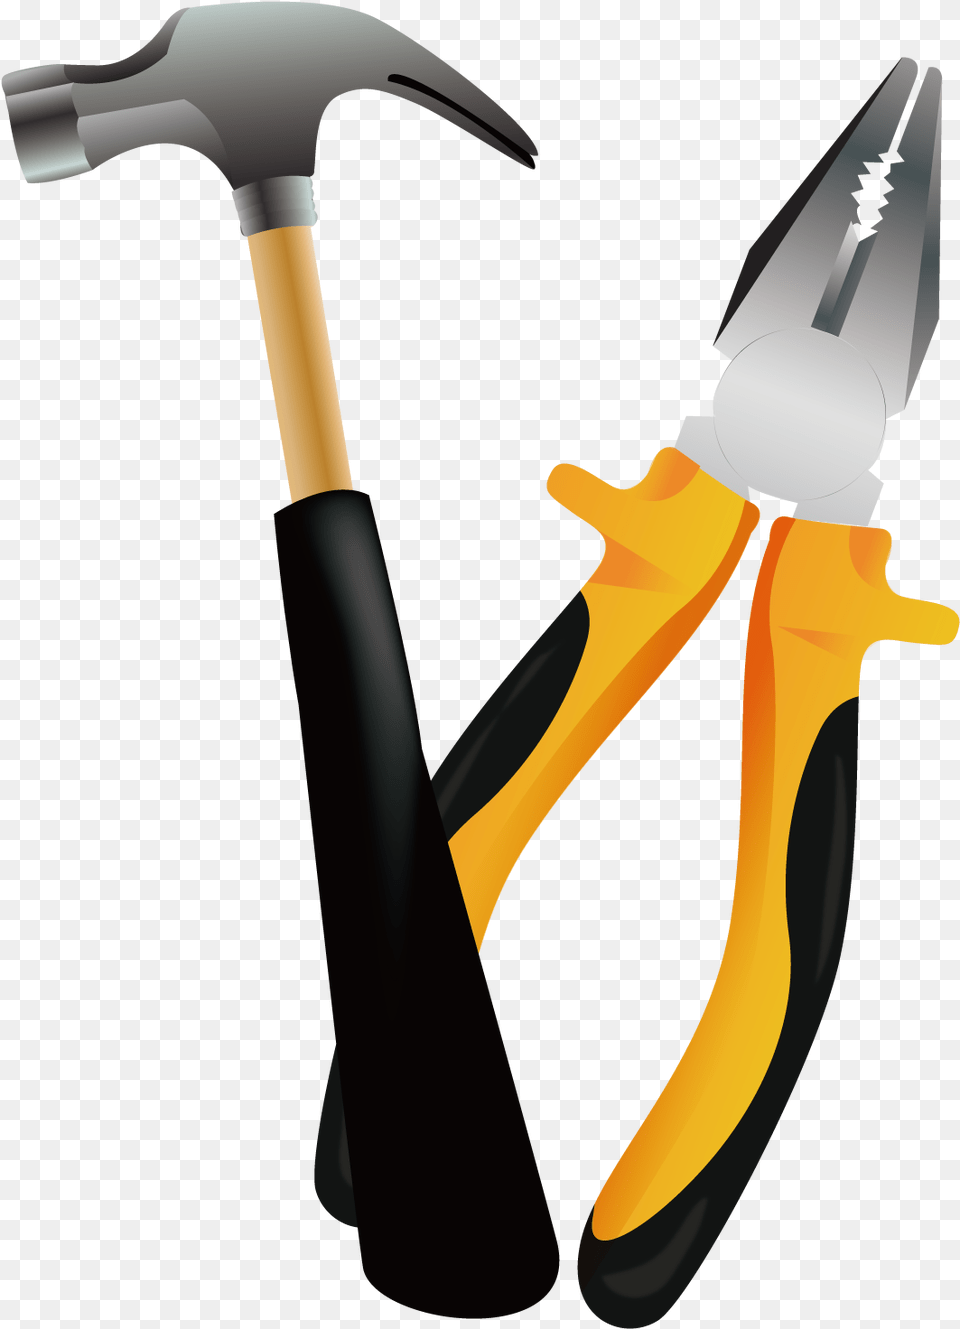 Metalworking Hand Tool, Device, Pliers, Smoke Pipe Free Transparent Png